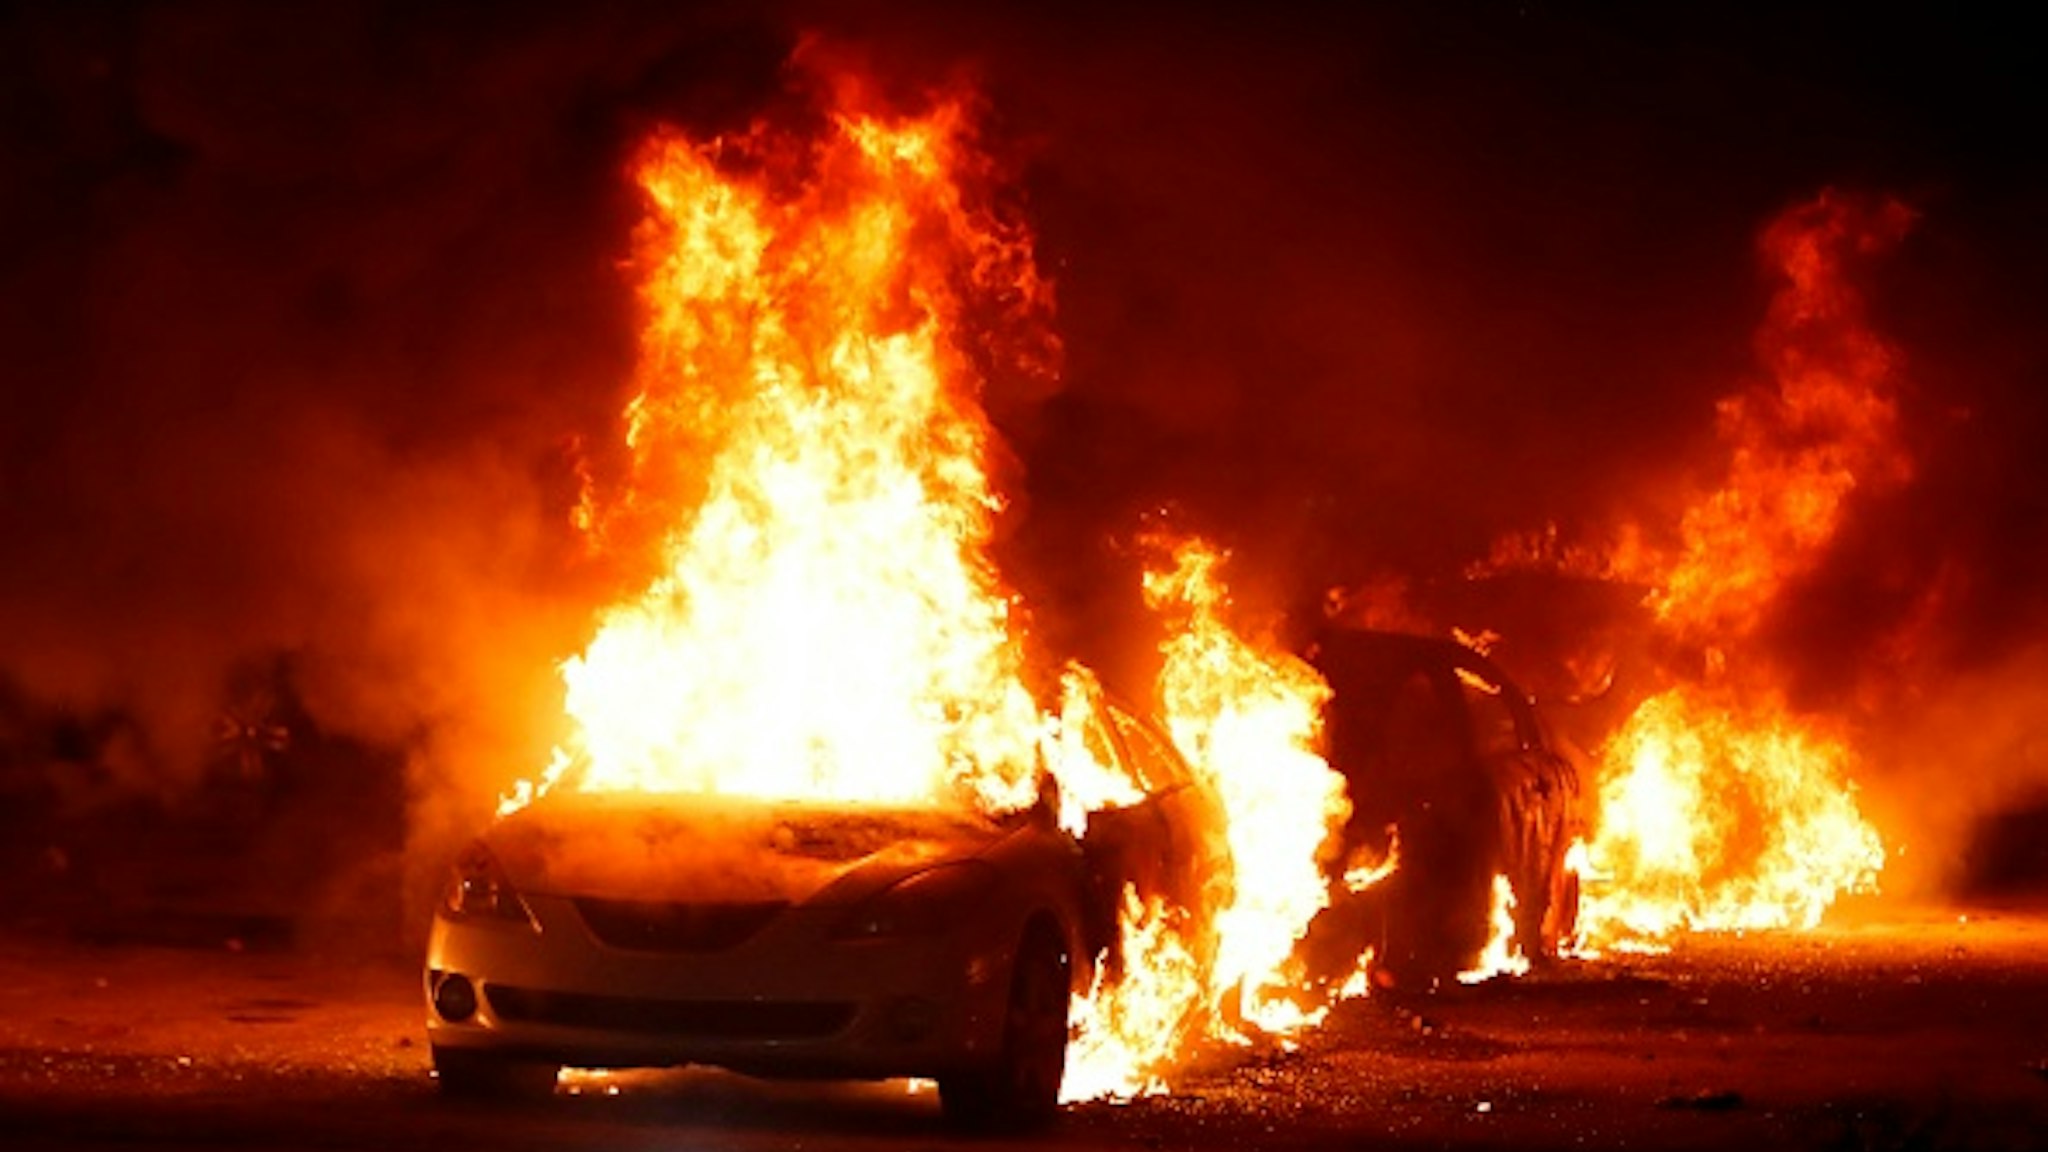 Flames roar from cars torched by protestors a few blocks from the County Court House during a demonstration against the shooting of Jacob Blake, who was shot in the back multiple times by police the day before, prompting community protests in Kenosha, Wisconsin on August 24, 2020. - Police fired tear gas on August 24 when a protest demanding racial justice in the city of Kenosha in Wisconsin turned violent, as rage builds once more in the US at the shooting of a black man by a white officer.